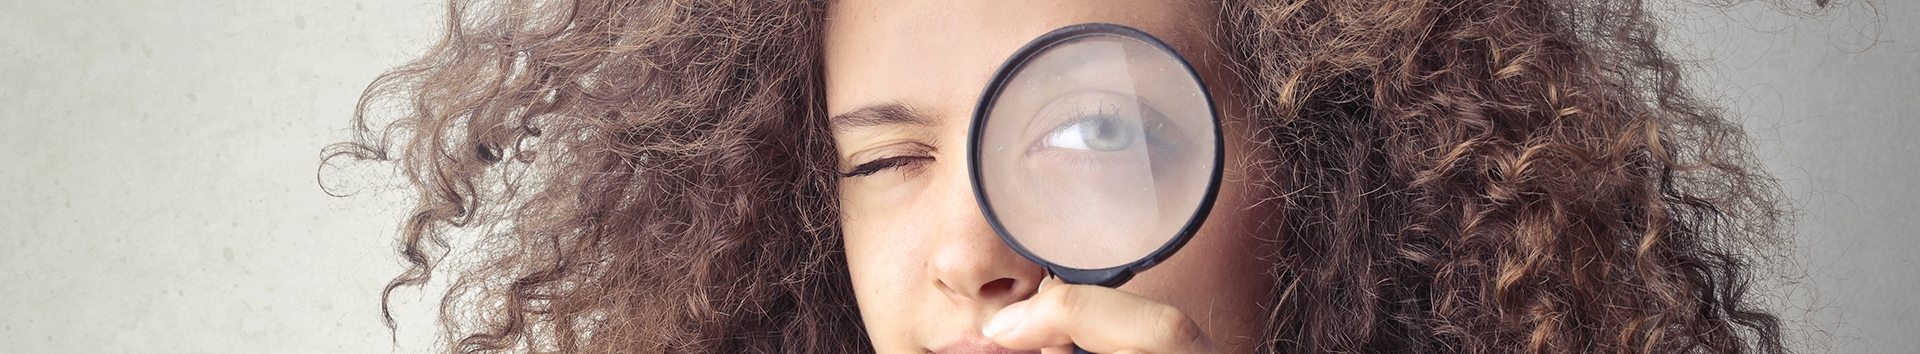 portrait-photo-of-woman-holding-up-a-magnifying-glass-over-3771107